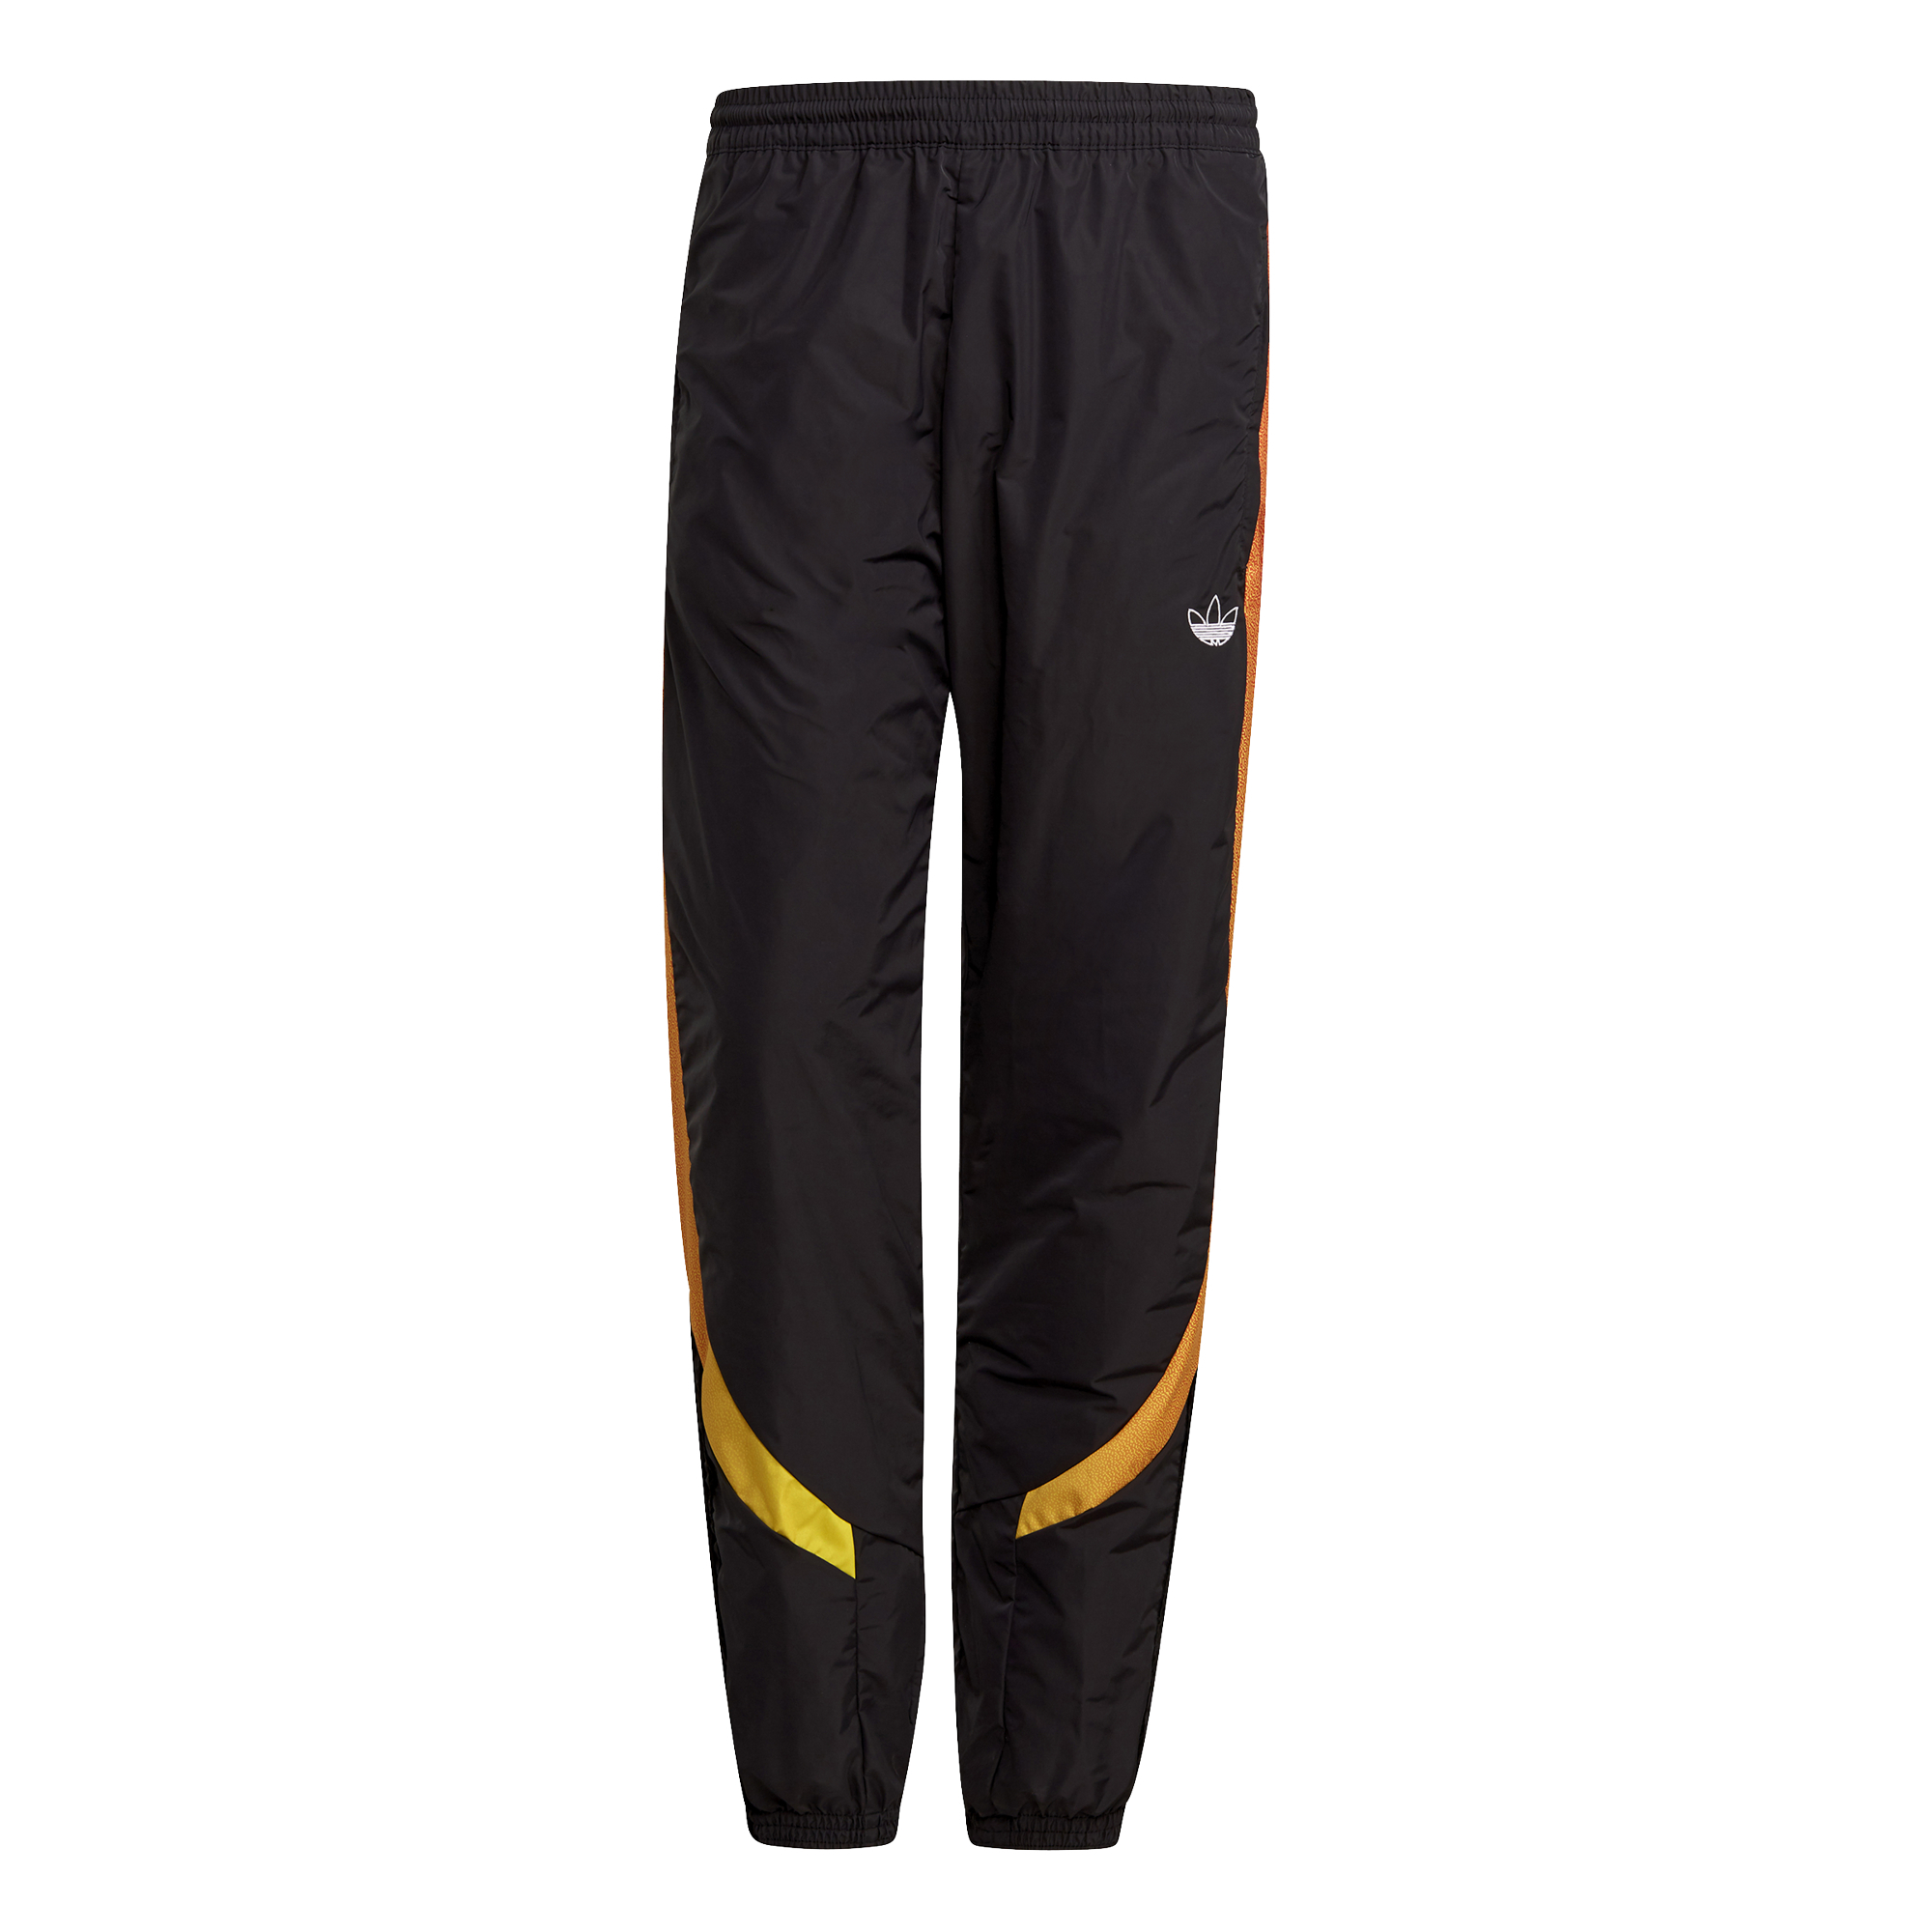 Online Shopping Kuwait | Reebok, Nike, Puma & More | Free Delivery | Easy Exchange & Returns | SNKR ADIDAS MEN'S SPRT SUPERSPORT WOVEN TRACK PANTS